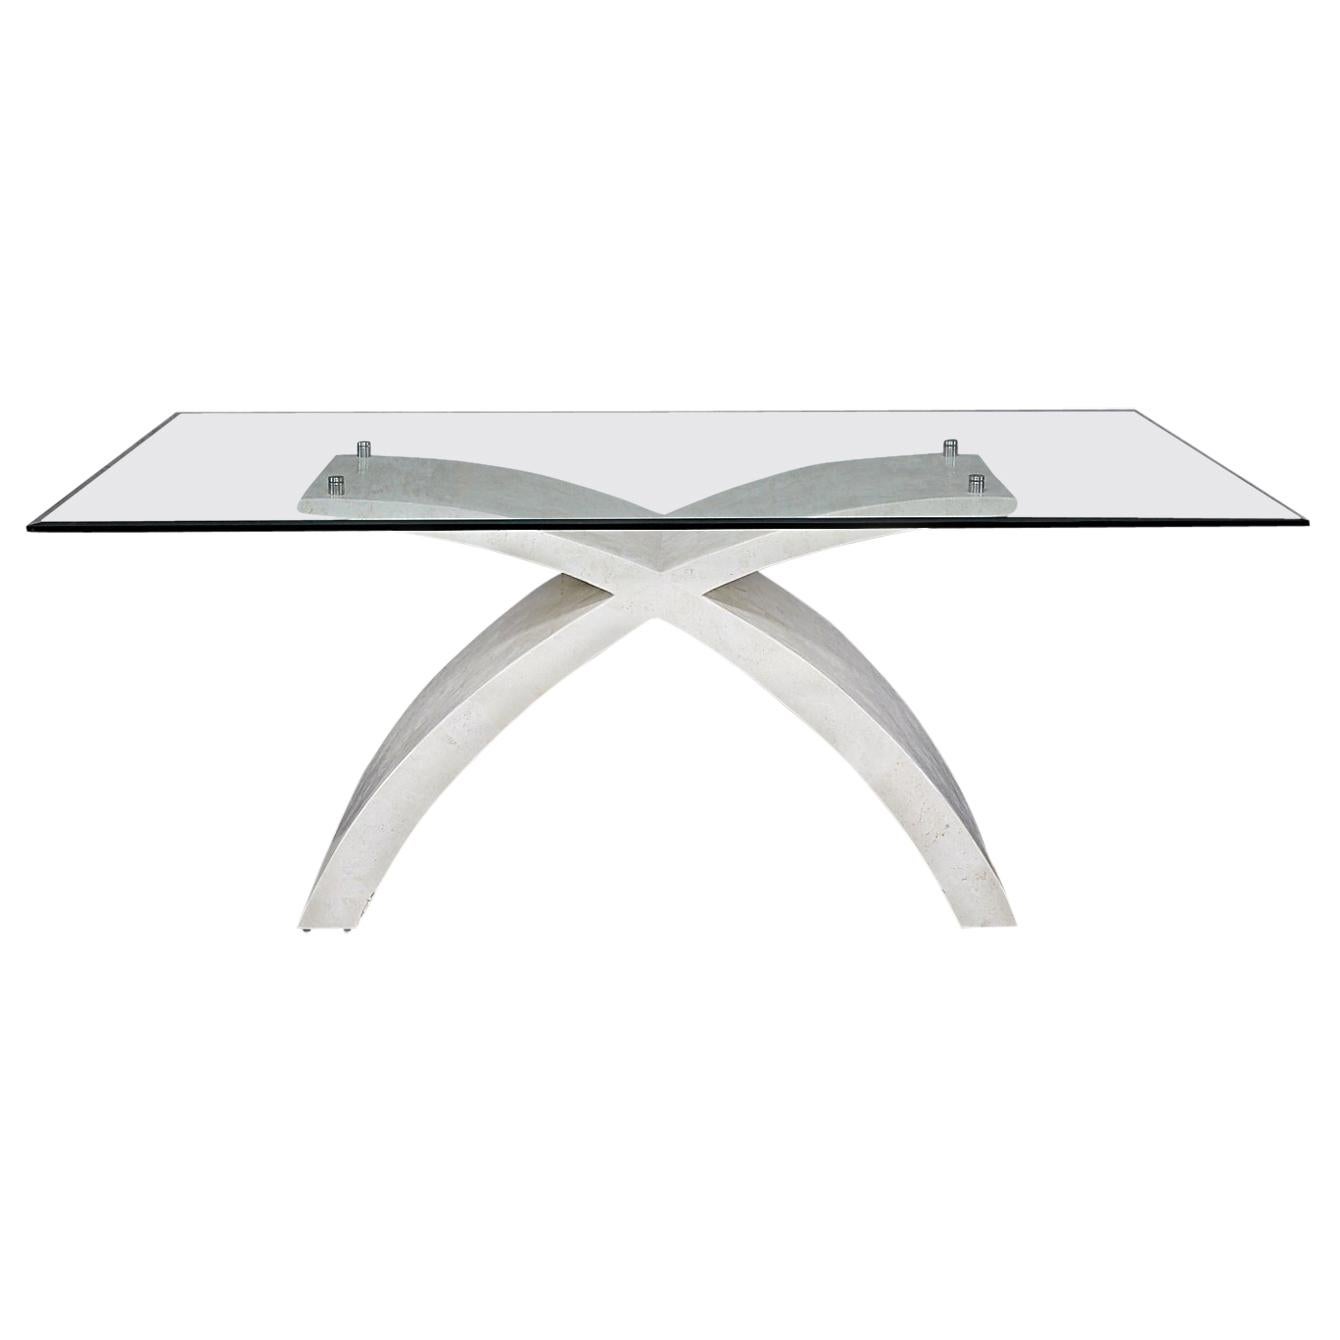 Postmodern White Tessellated Stone X-Base Dining Table with Glass Top, 1990s For Sale